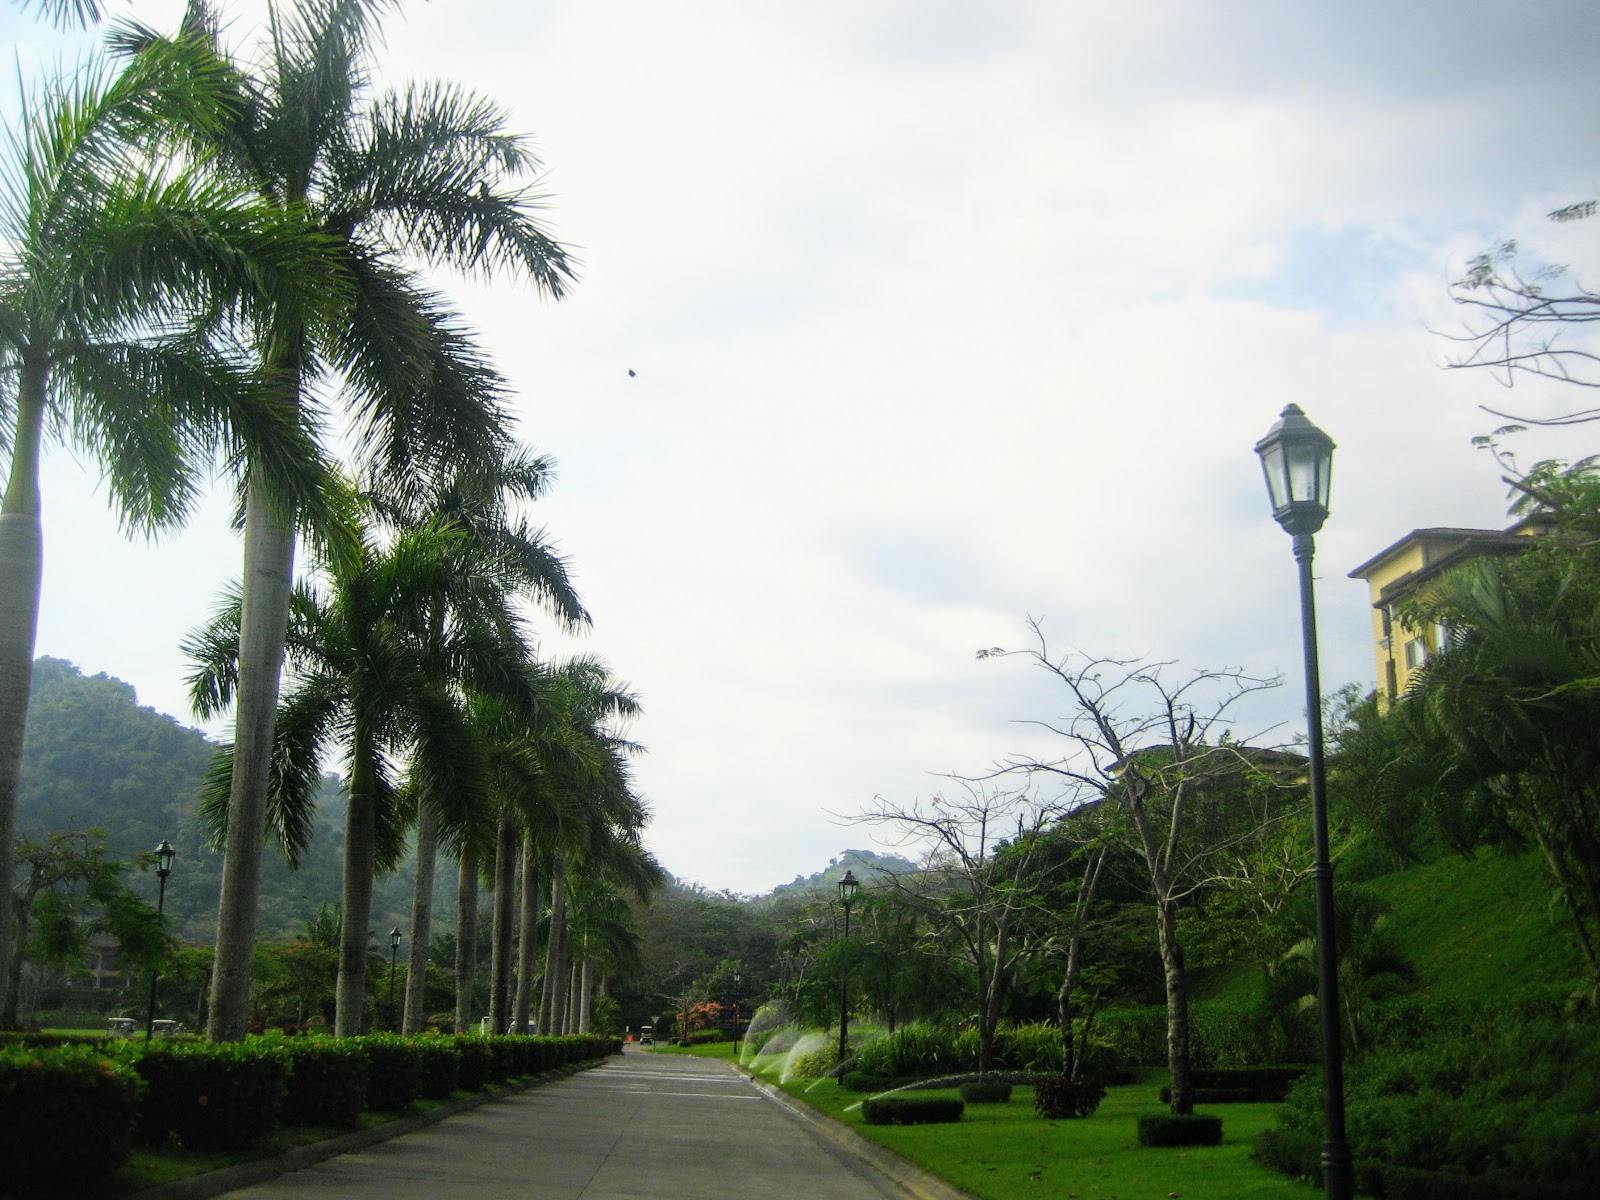 Driveway to hotel's main entrance